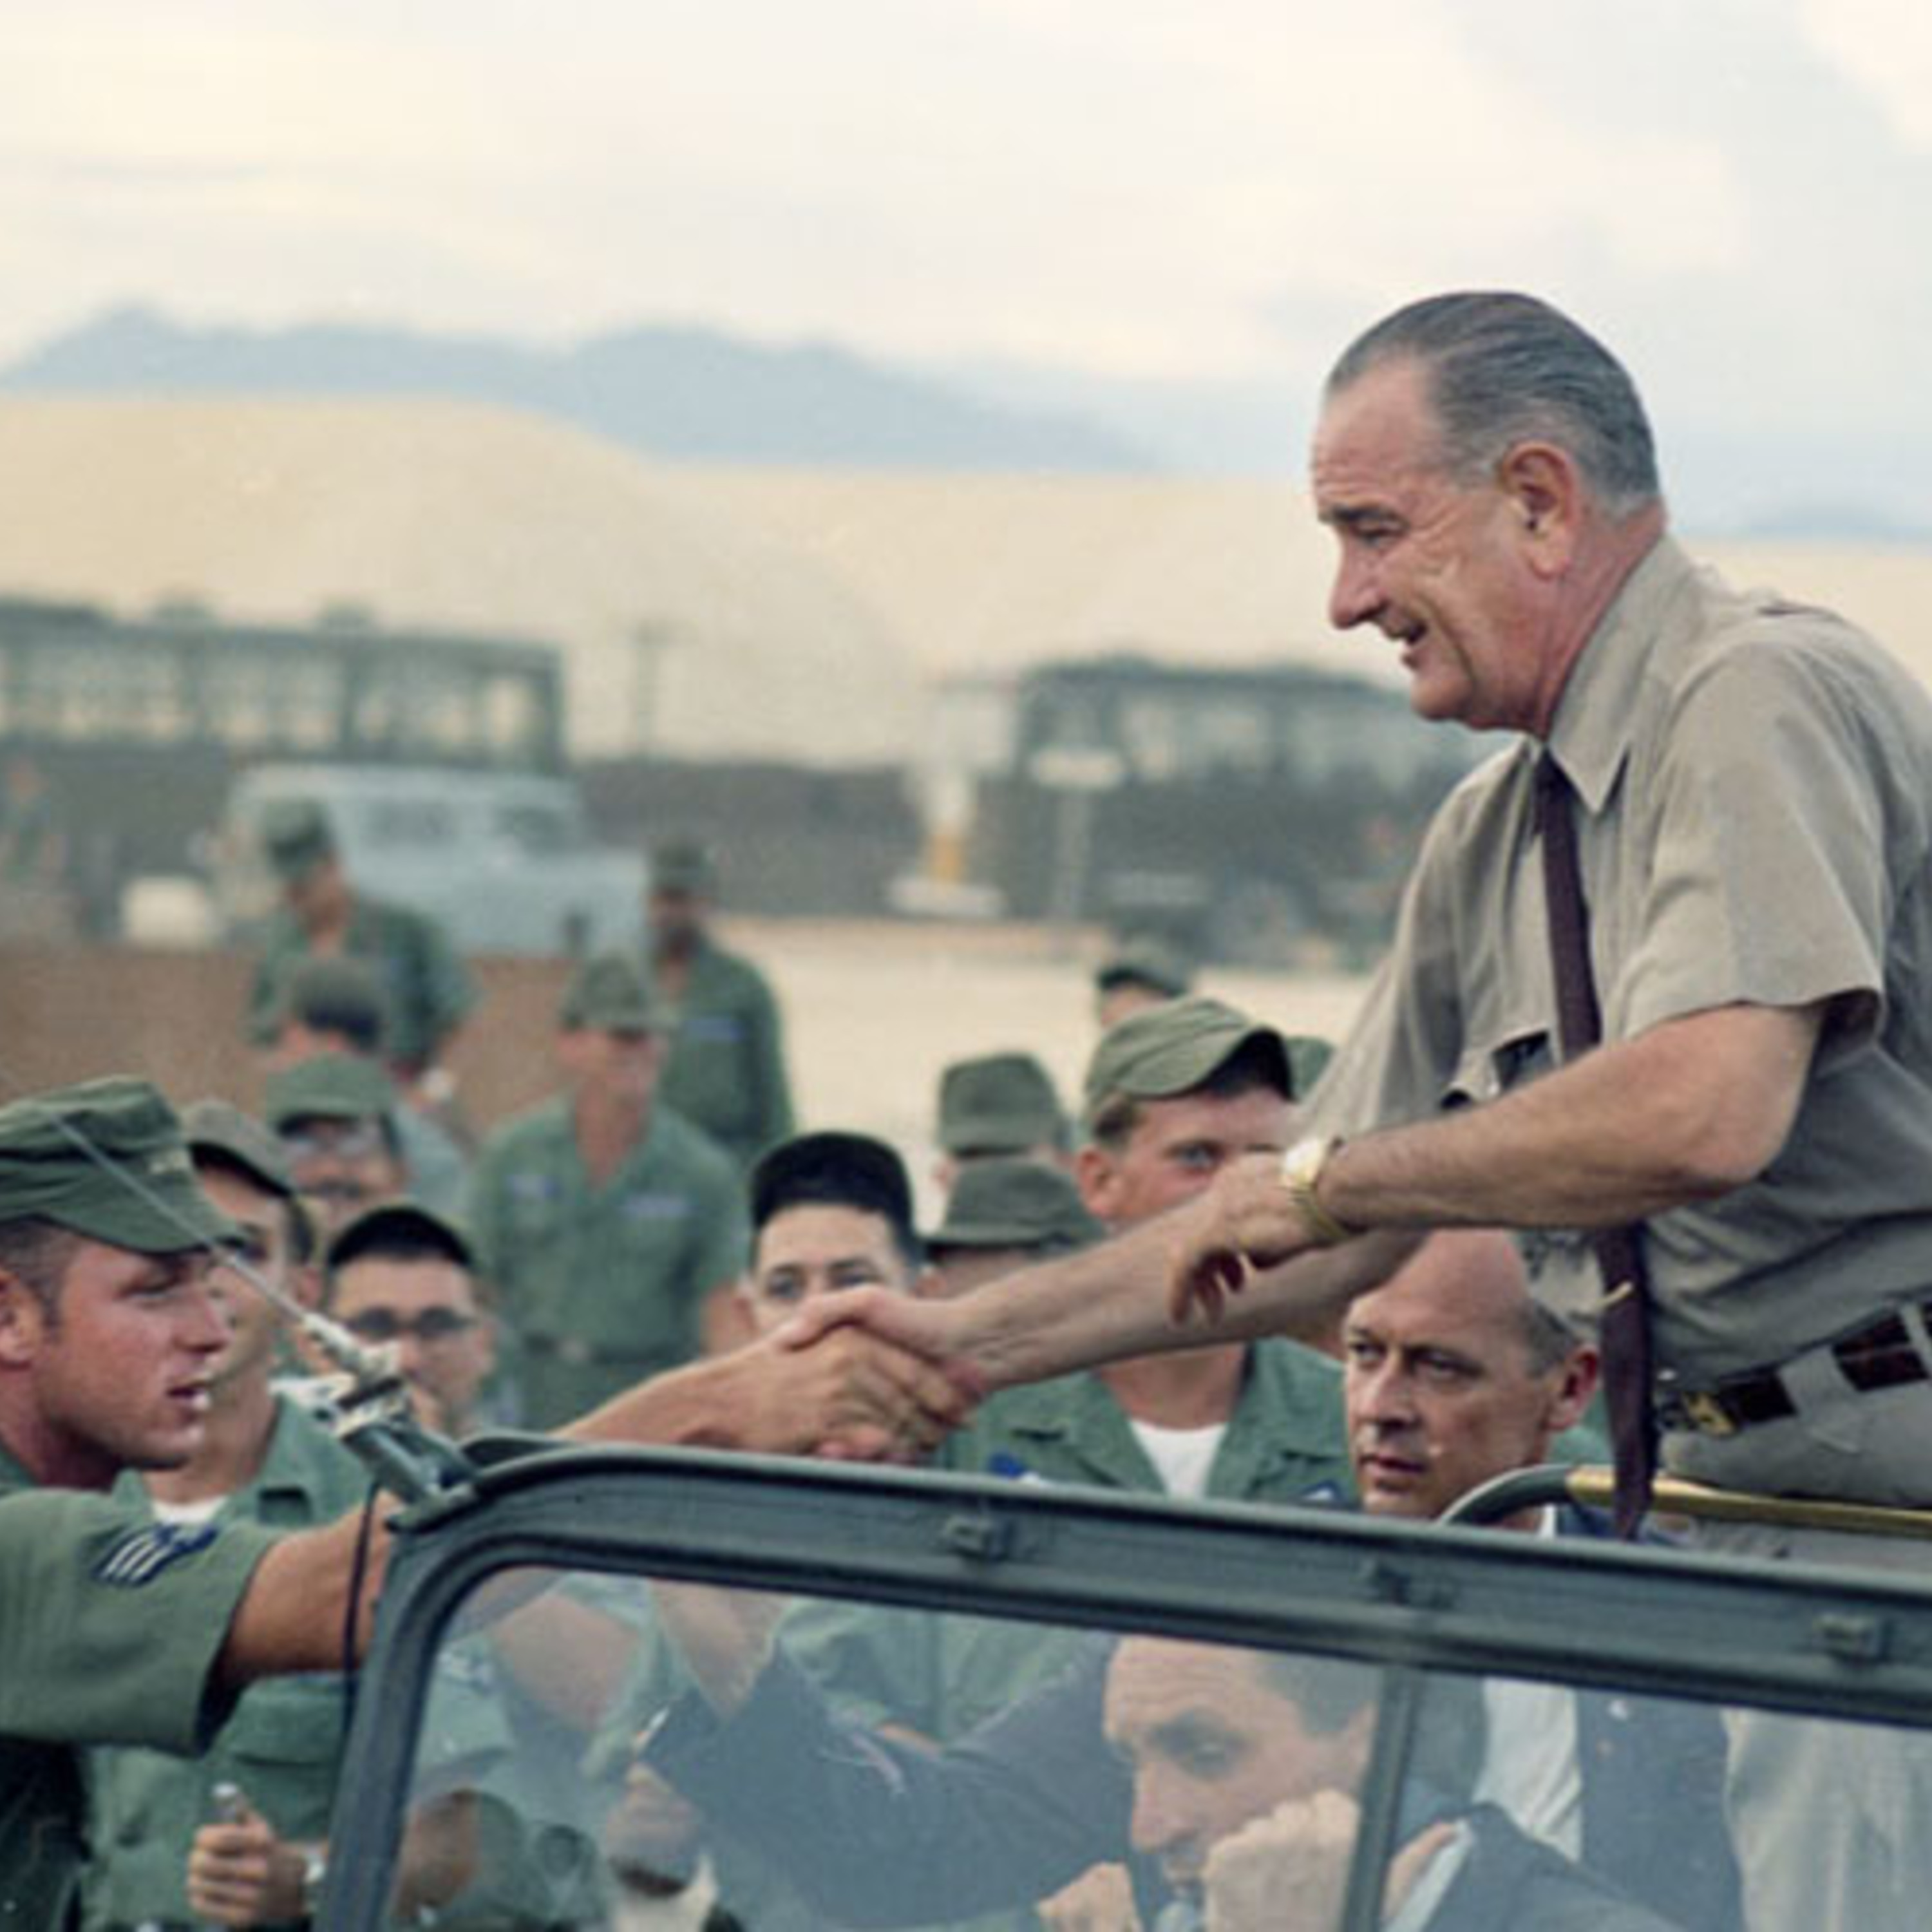 PRESIDENT JOHNSON VISITS U.S. SOLDIERS AT CAM RANH BAY IN SOUTH VIETNAM